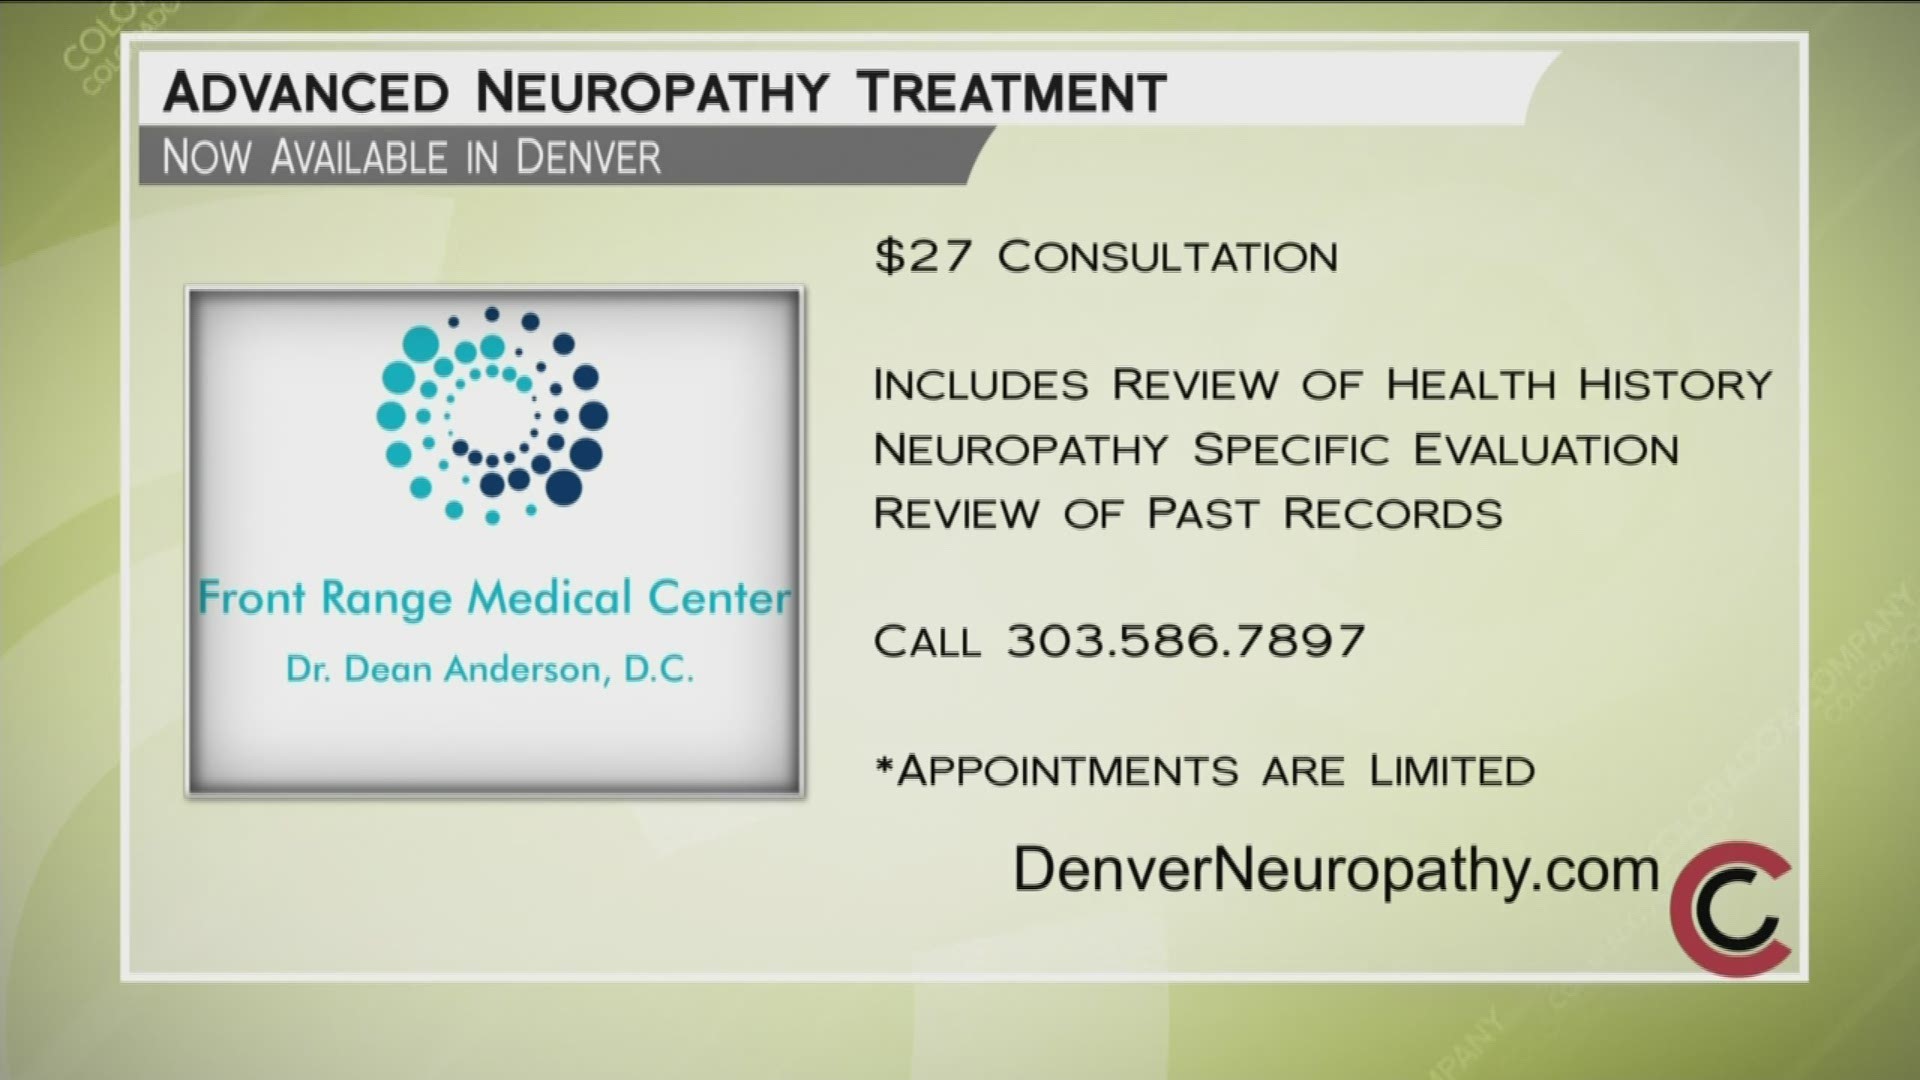 Call 303.586.7897 to schedule your consultation with Dr. Anderson. Mention COCO and get yours for only $27. Visit DenverNeuropathy.com for more information.